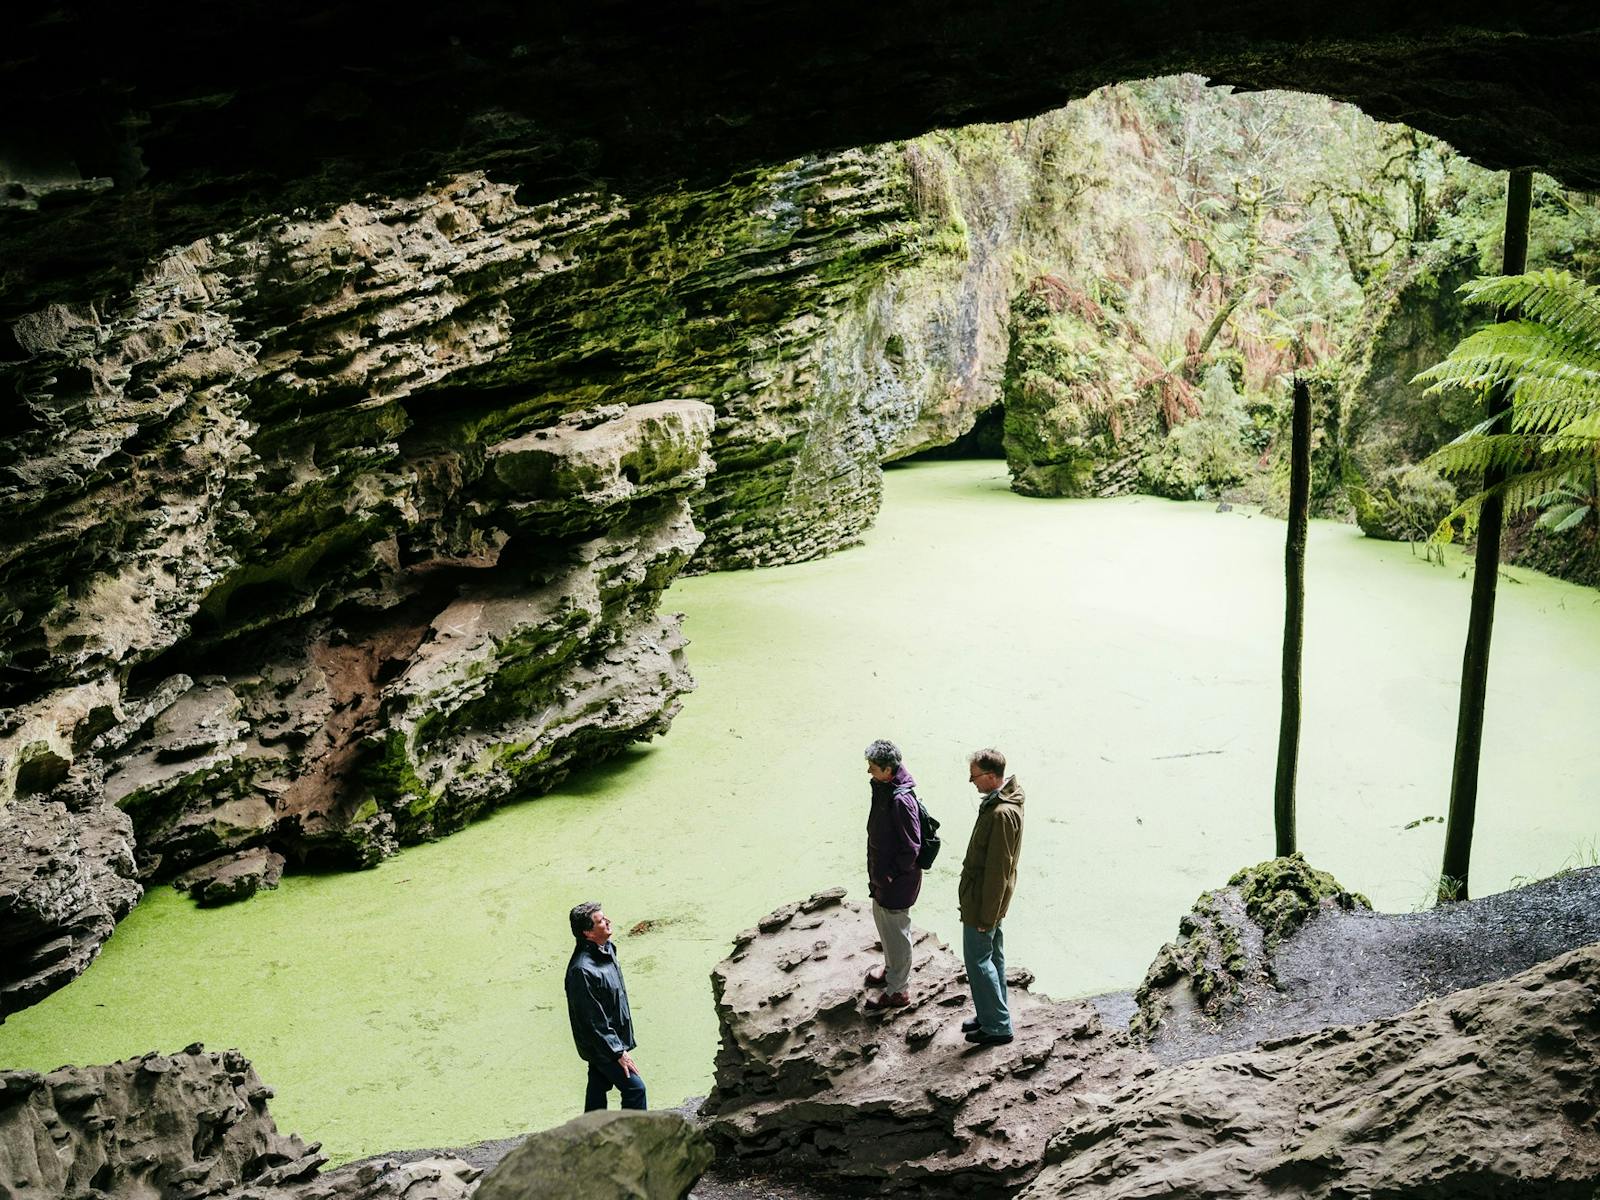 Couple at Trowutta Arch with tour guide. Algae swirling on surface of the water amidst rocks